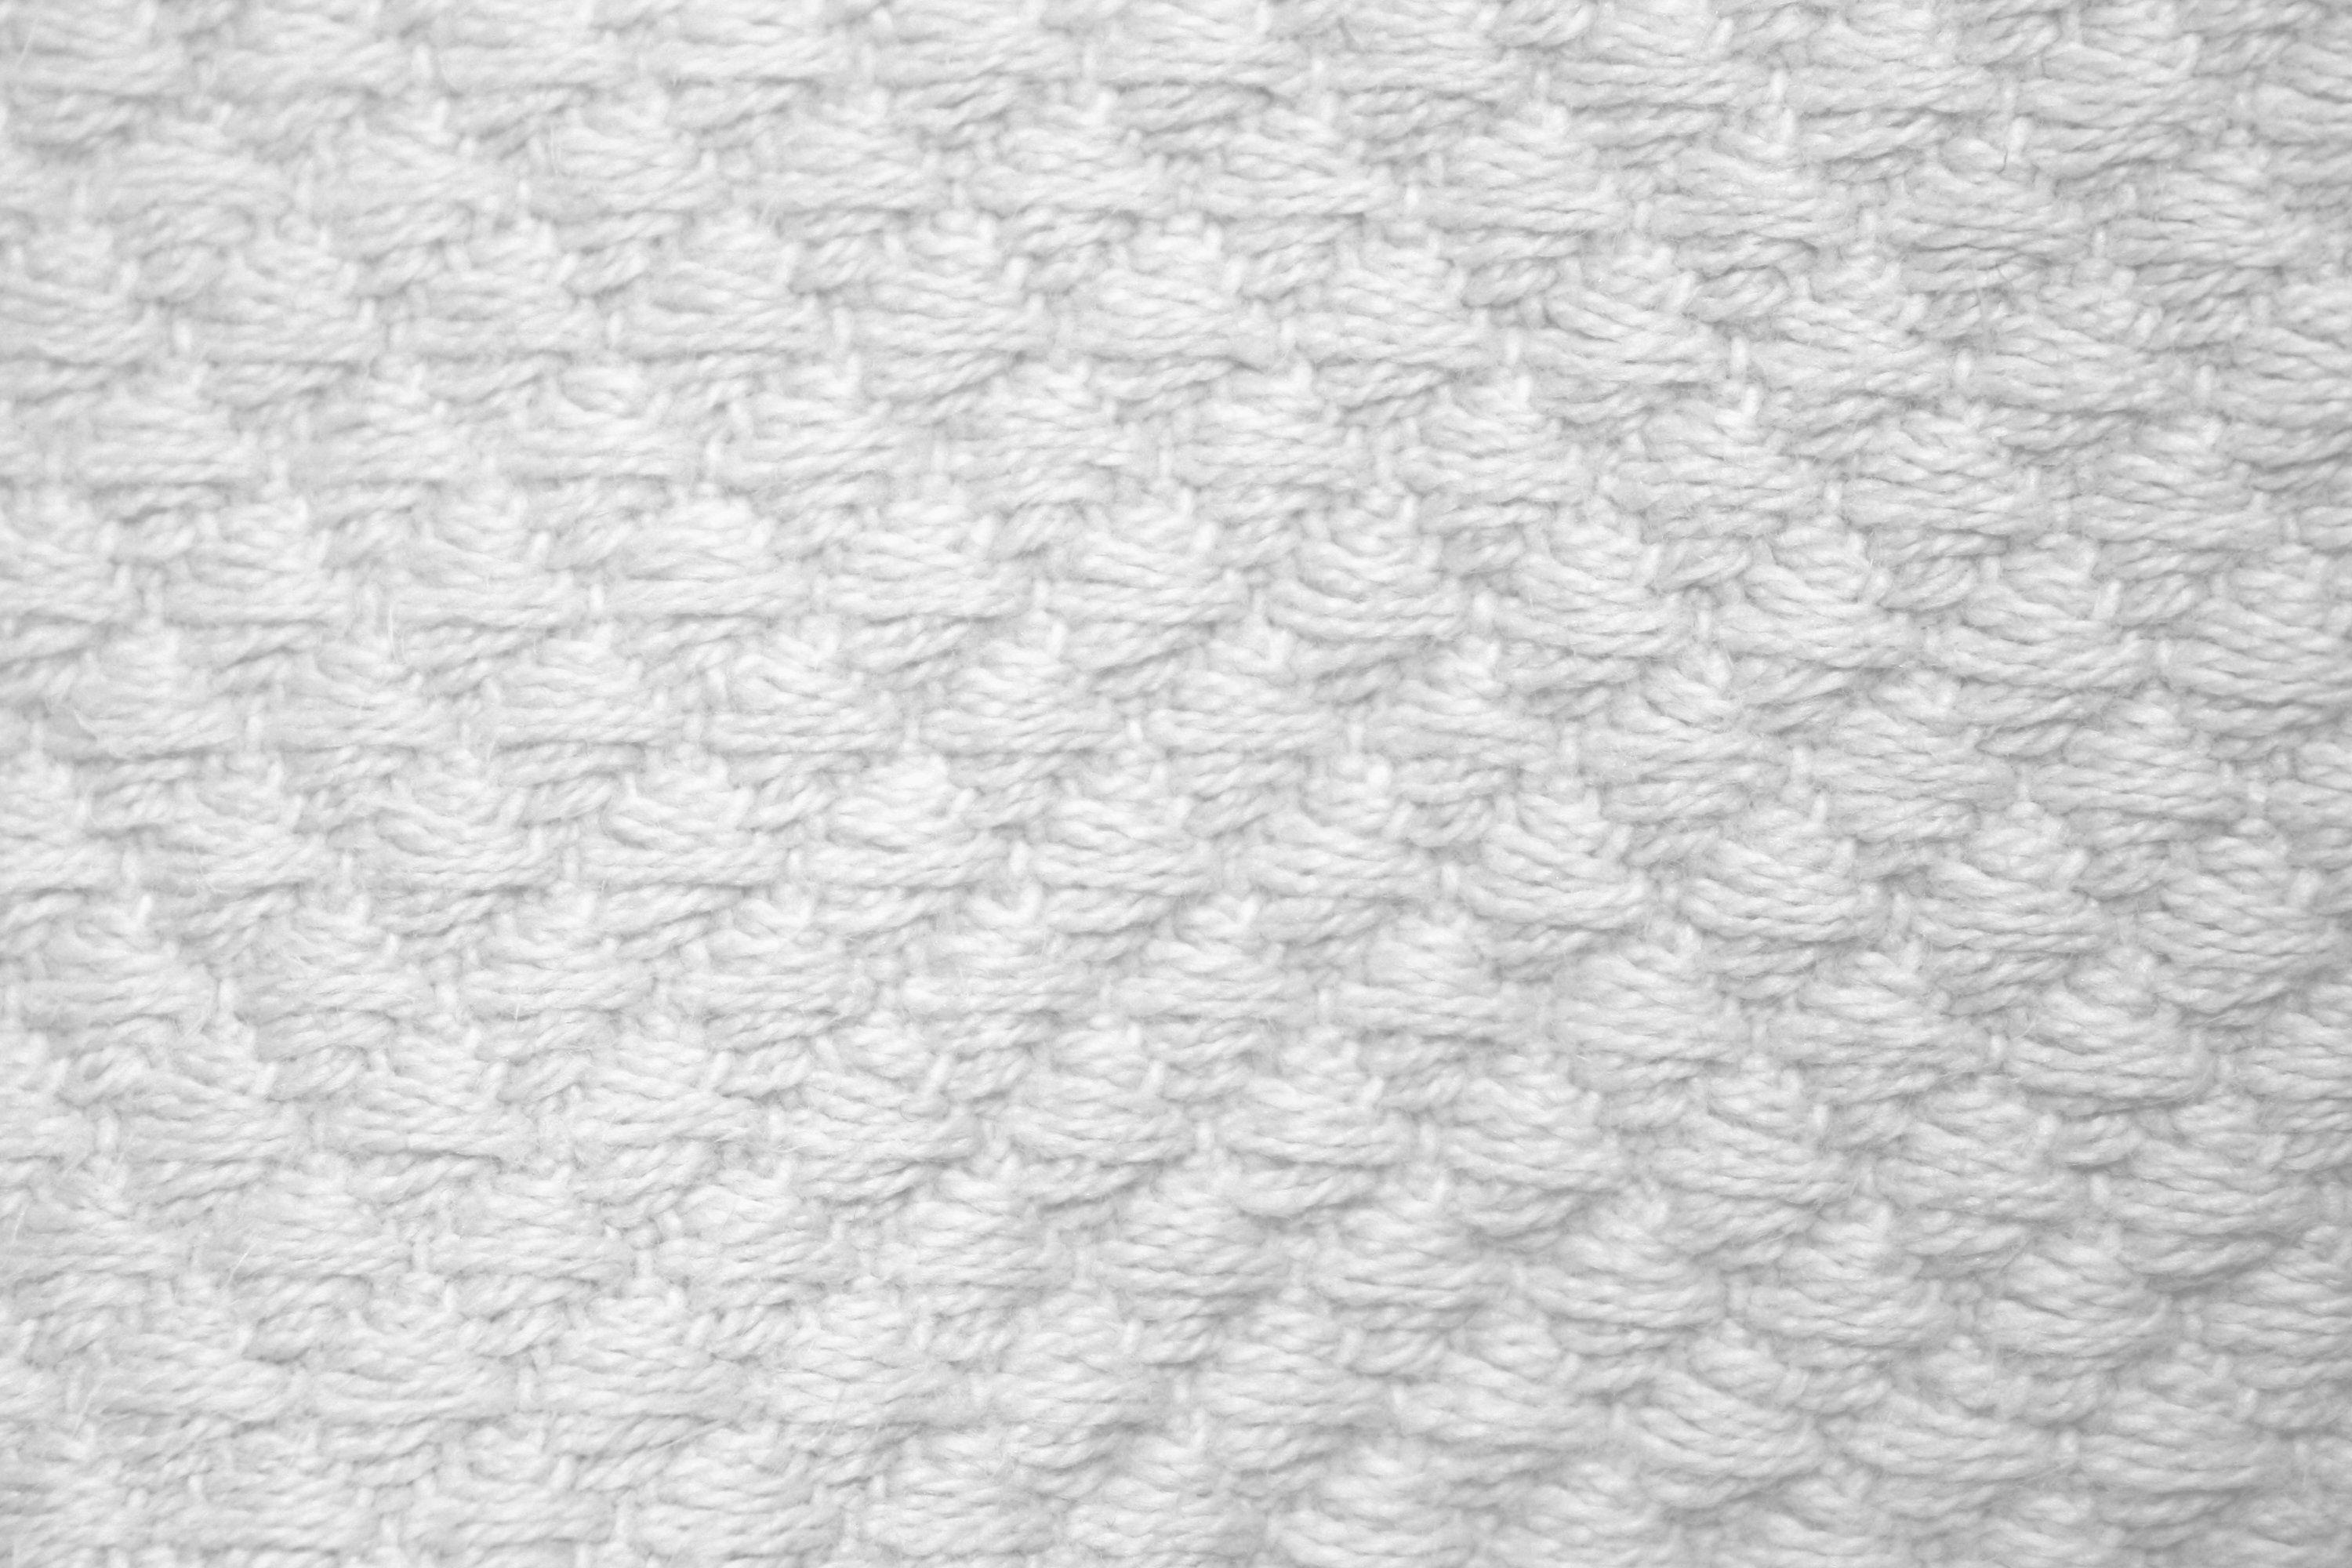 White Diamond Patterned Blanket Close Up Texture Picture. Free